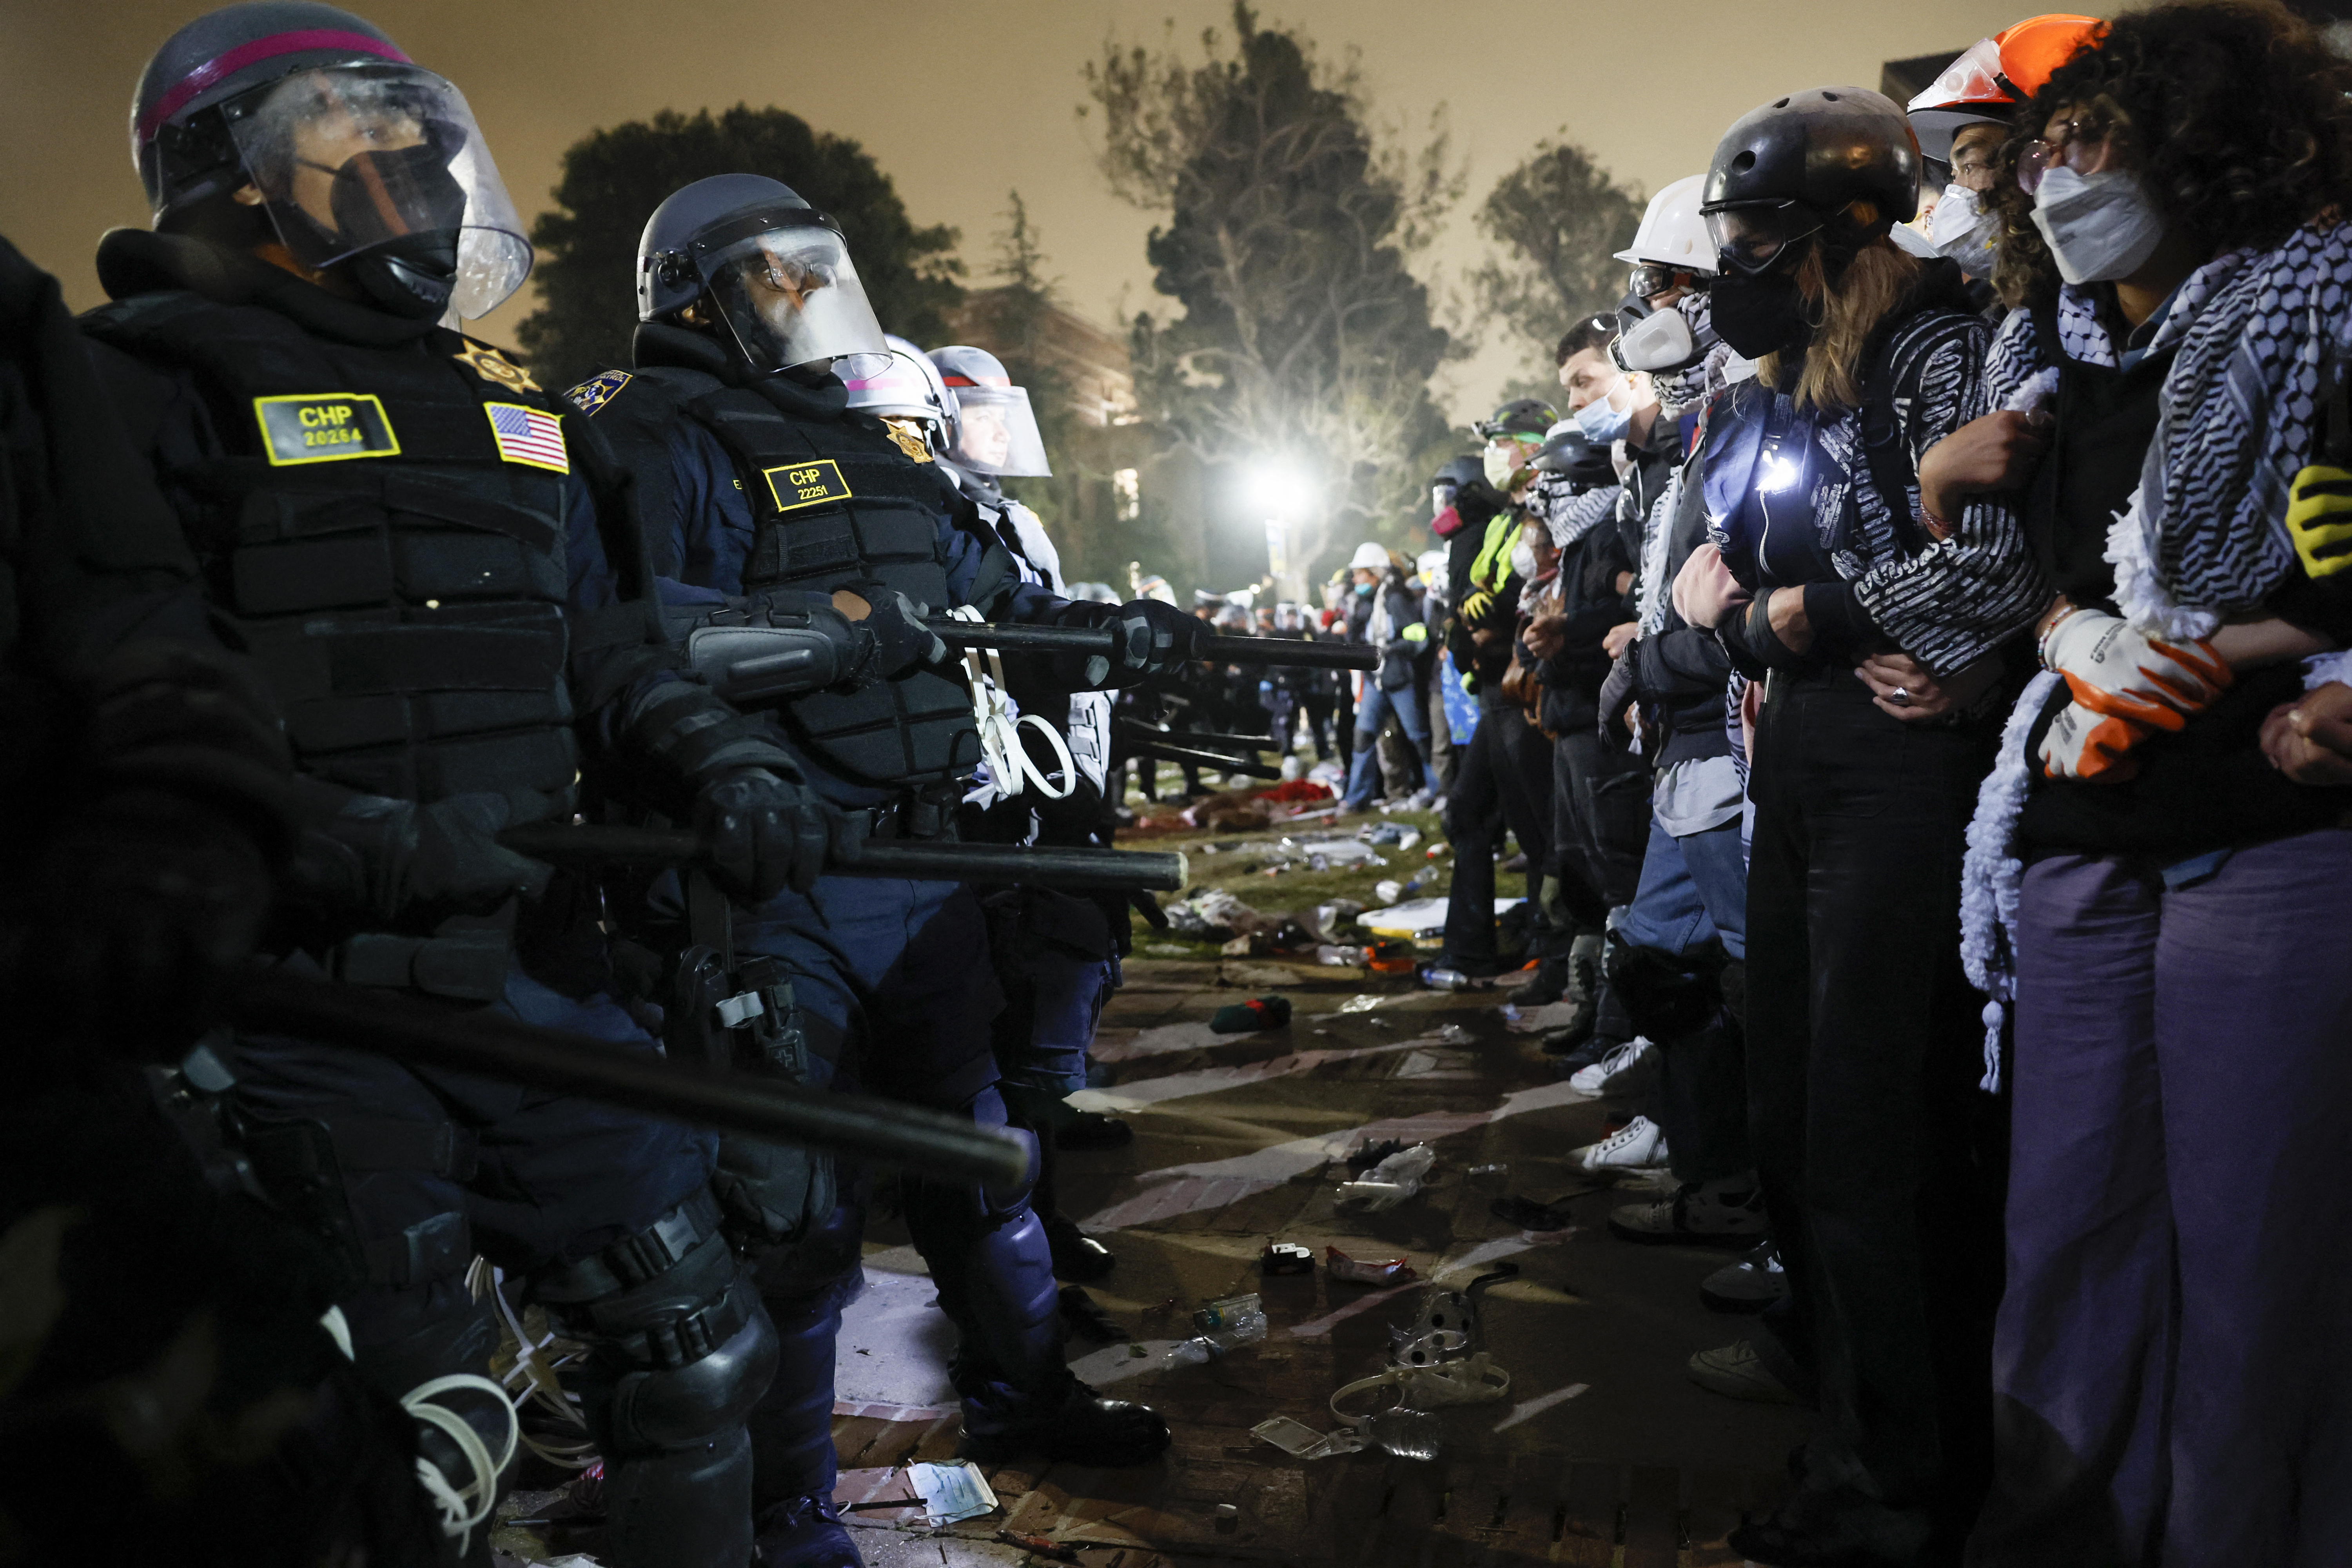 Police face off with pro-Palestinian protesters after destroying part of the encampment barricade on the UCLA campus early on Thursday, May 2.